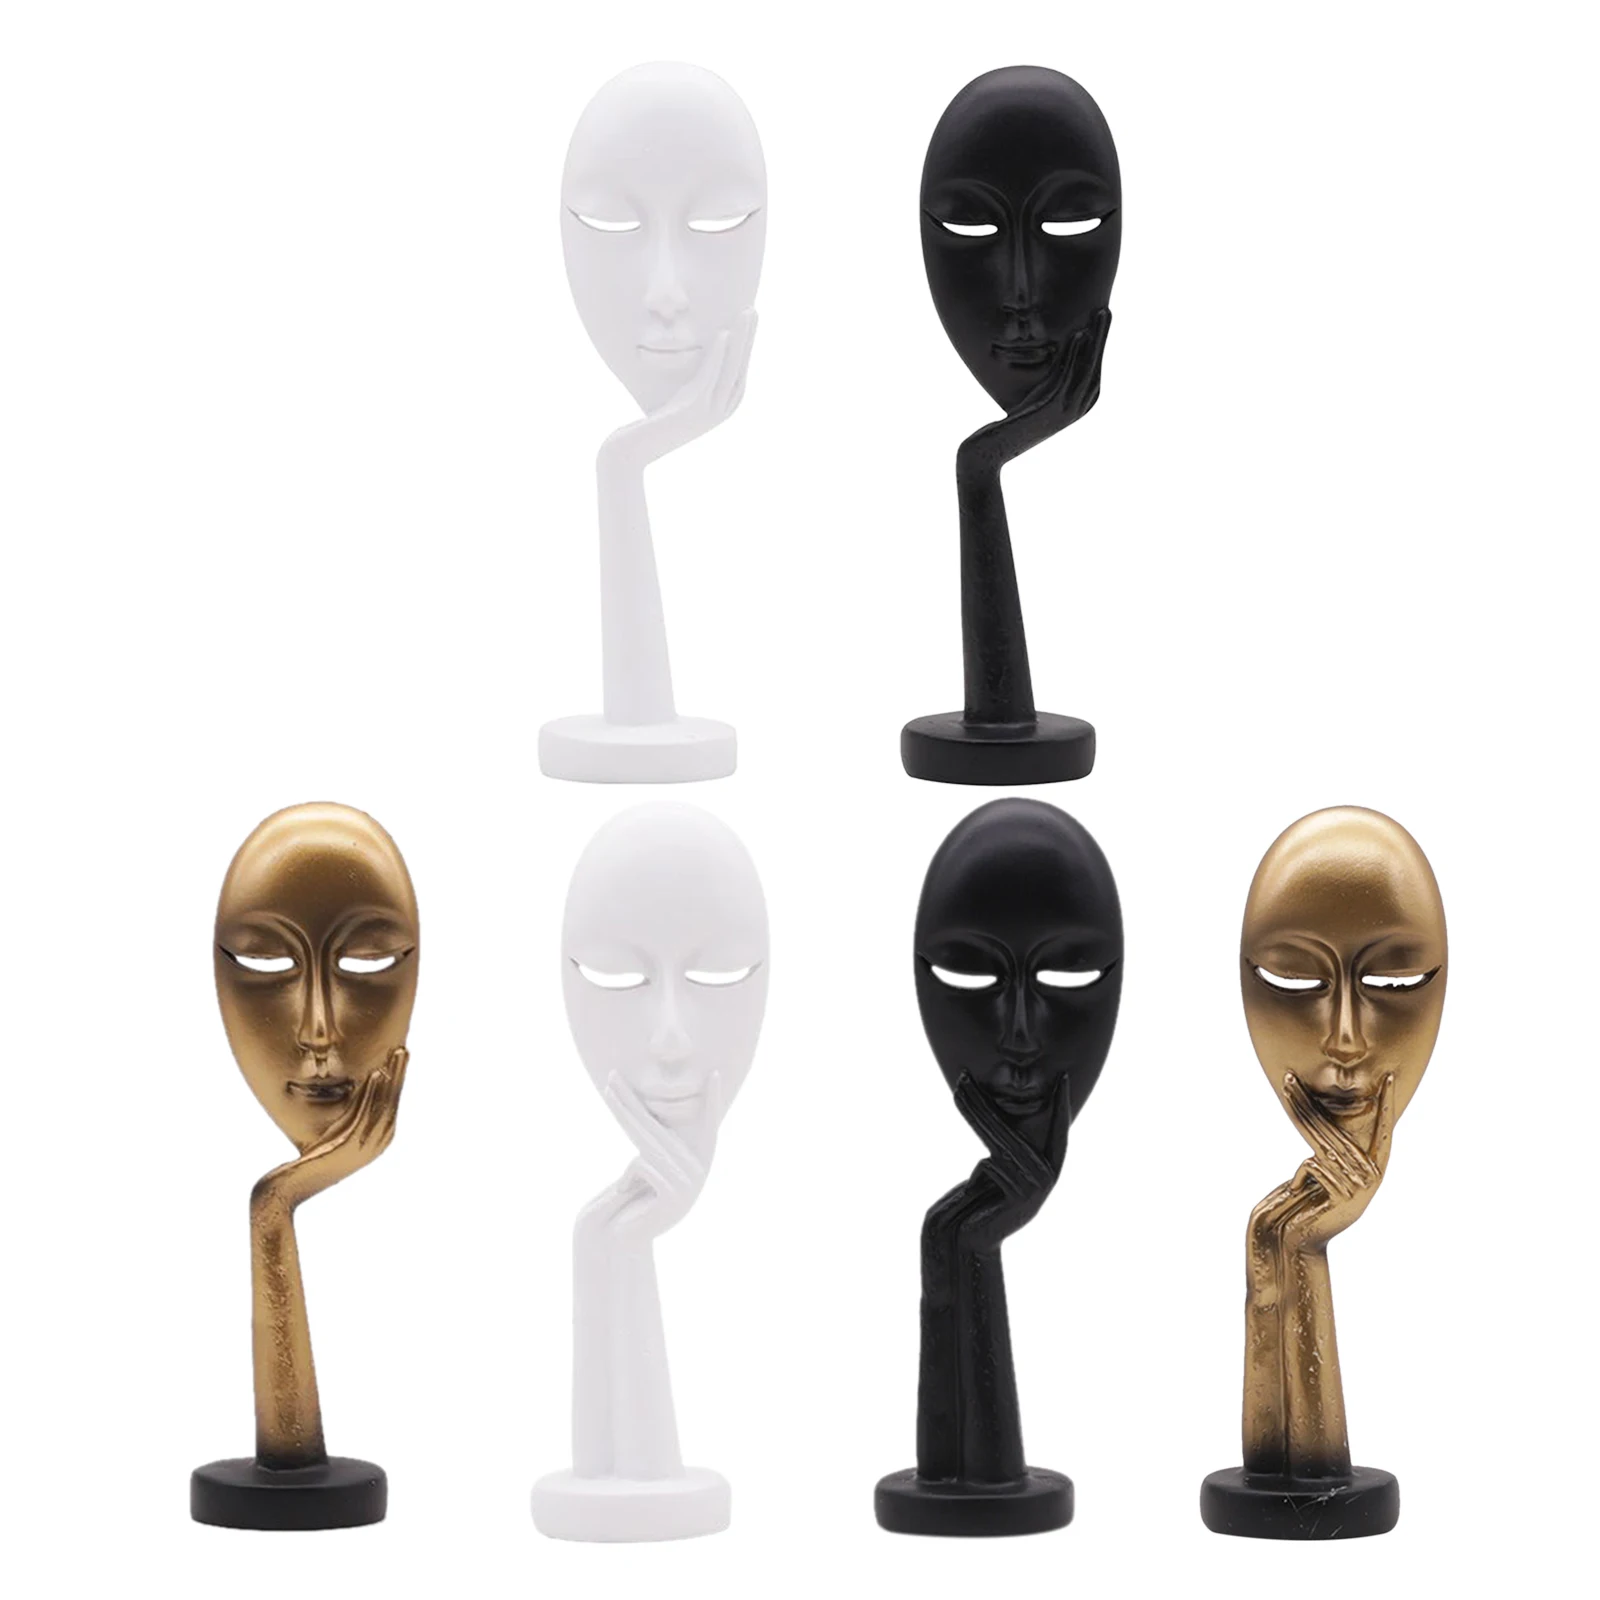 Creative and Abstract Man Figures,Hand Sculptures & Face Statues,The Thinking Man Figurine 